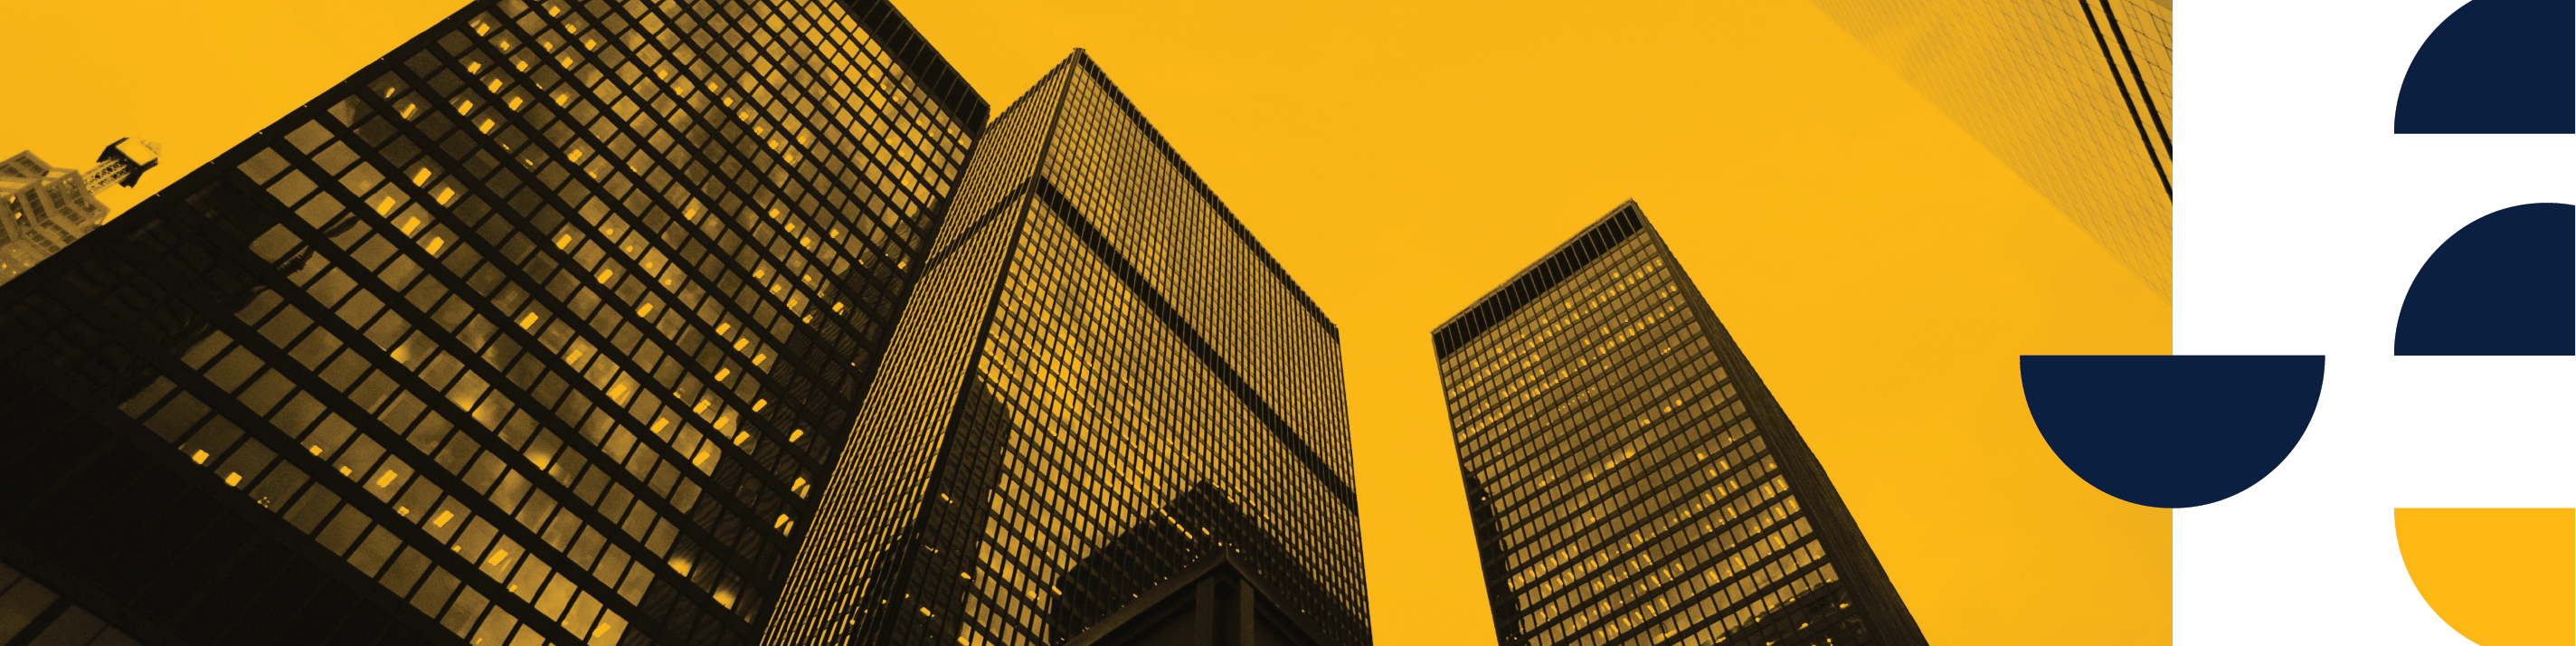 cityscape in yellow, ddos